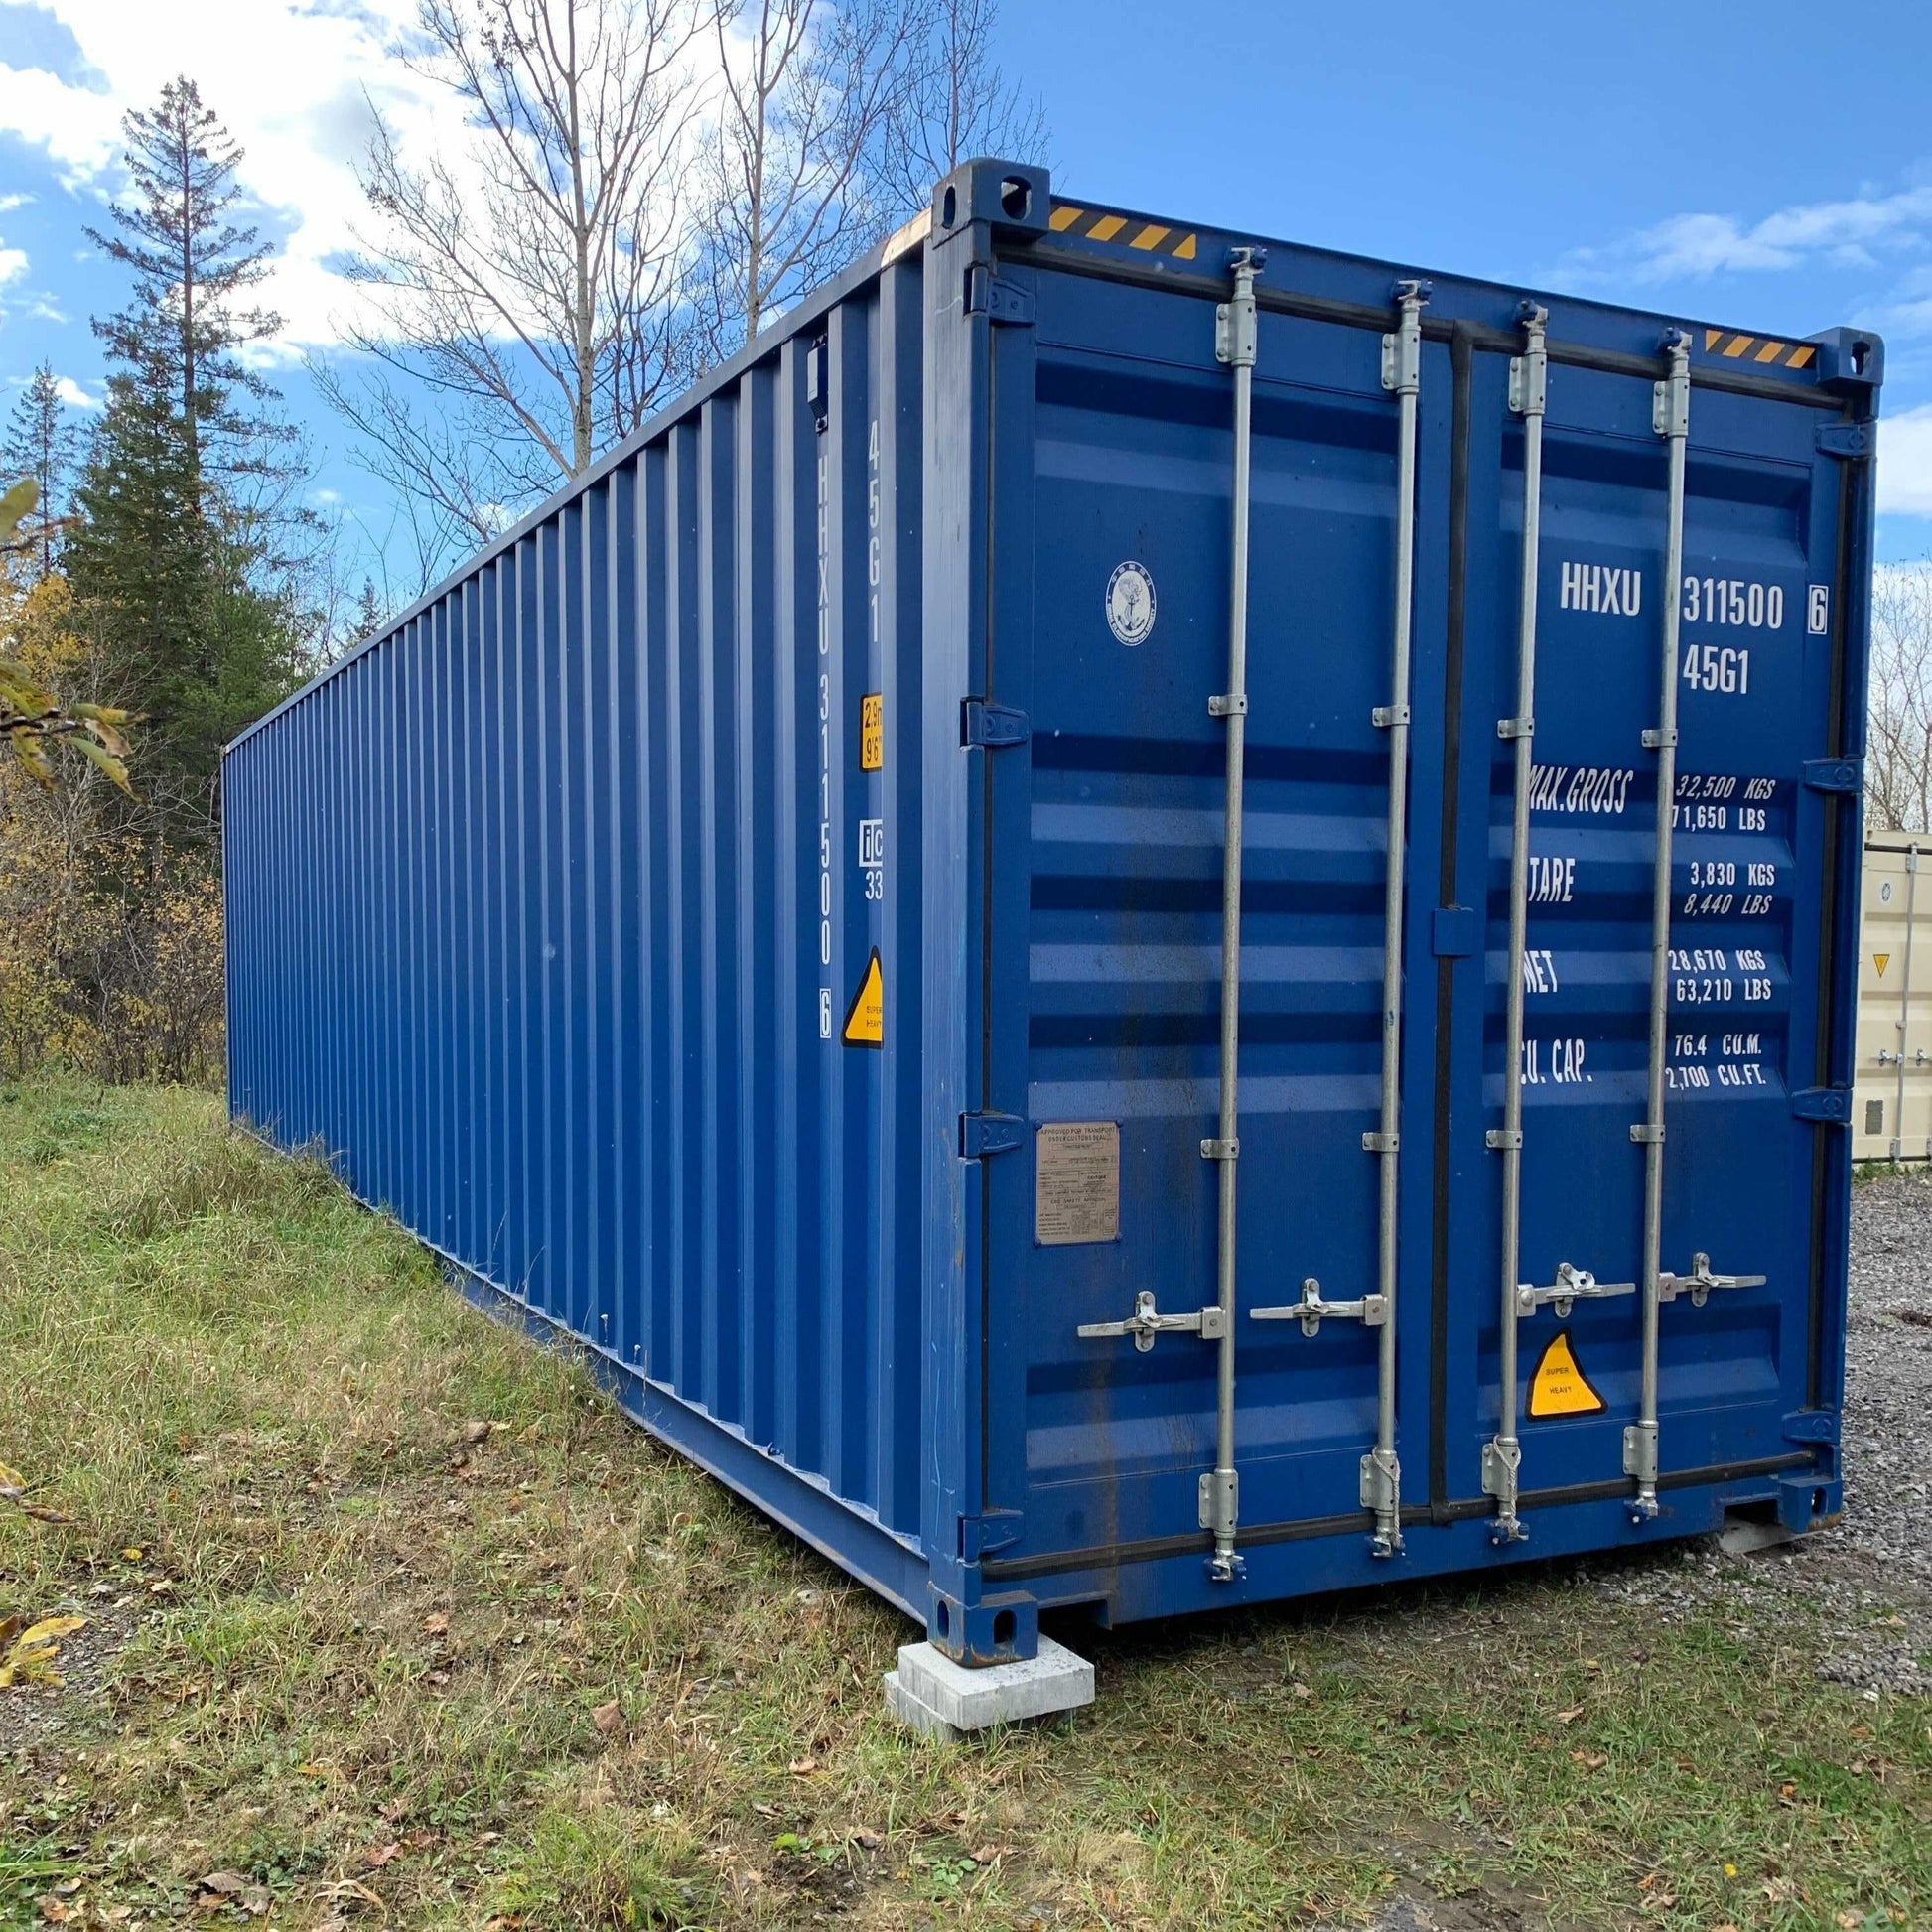 Blue 40 foot high cube shipping container